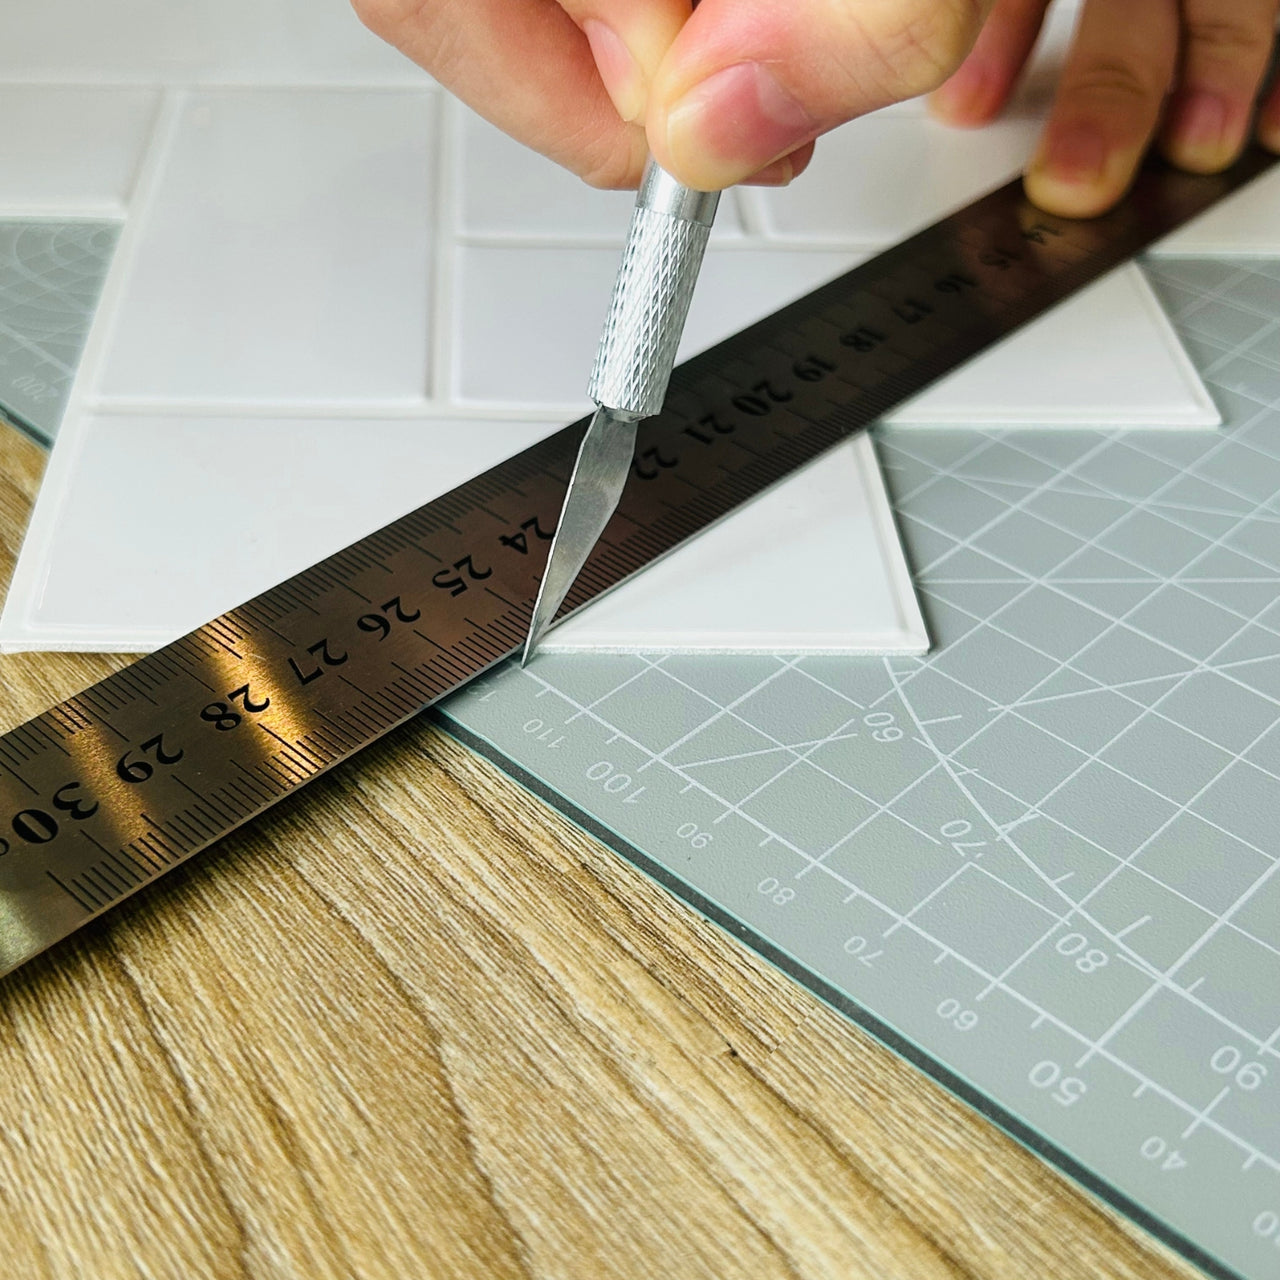 Craft knife used with metal ruler